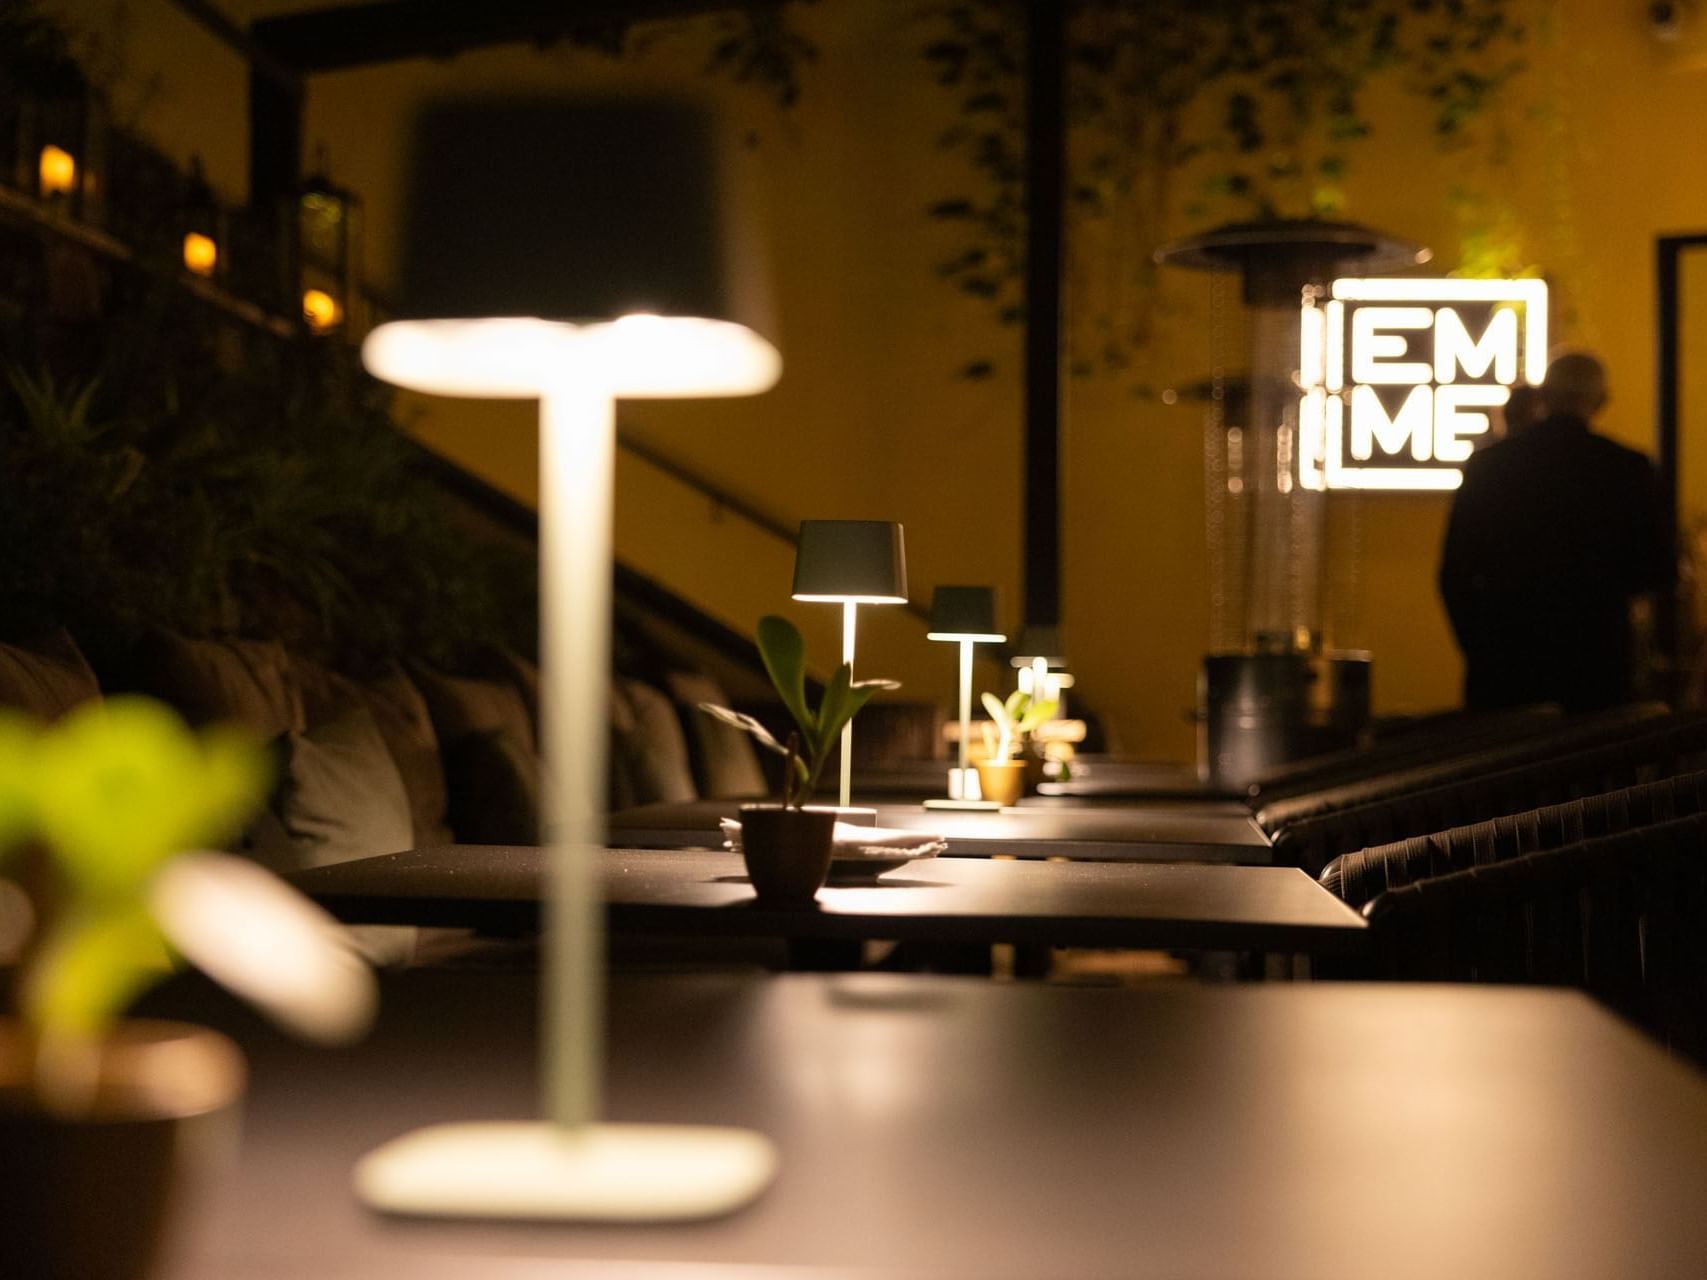 The dining area arranged at EMME Restaurant